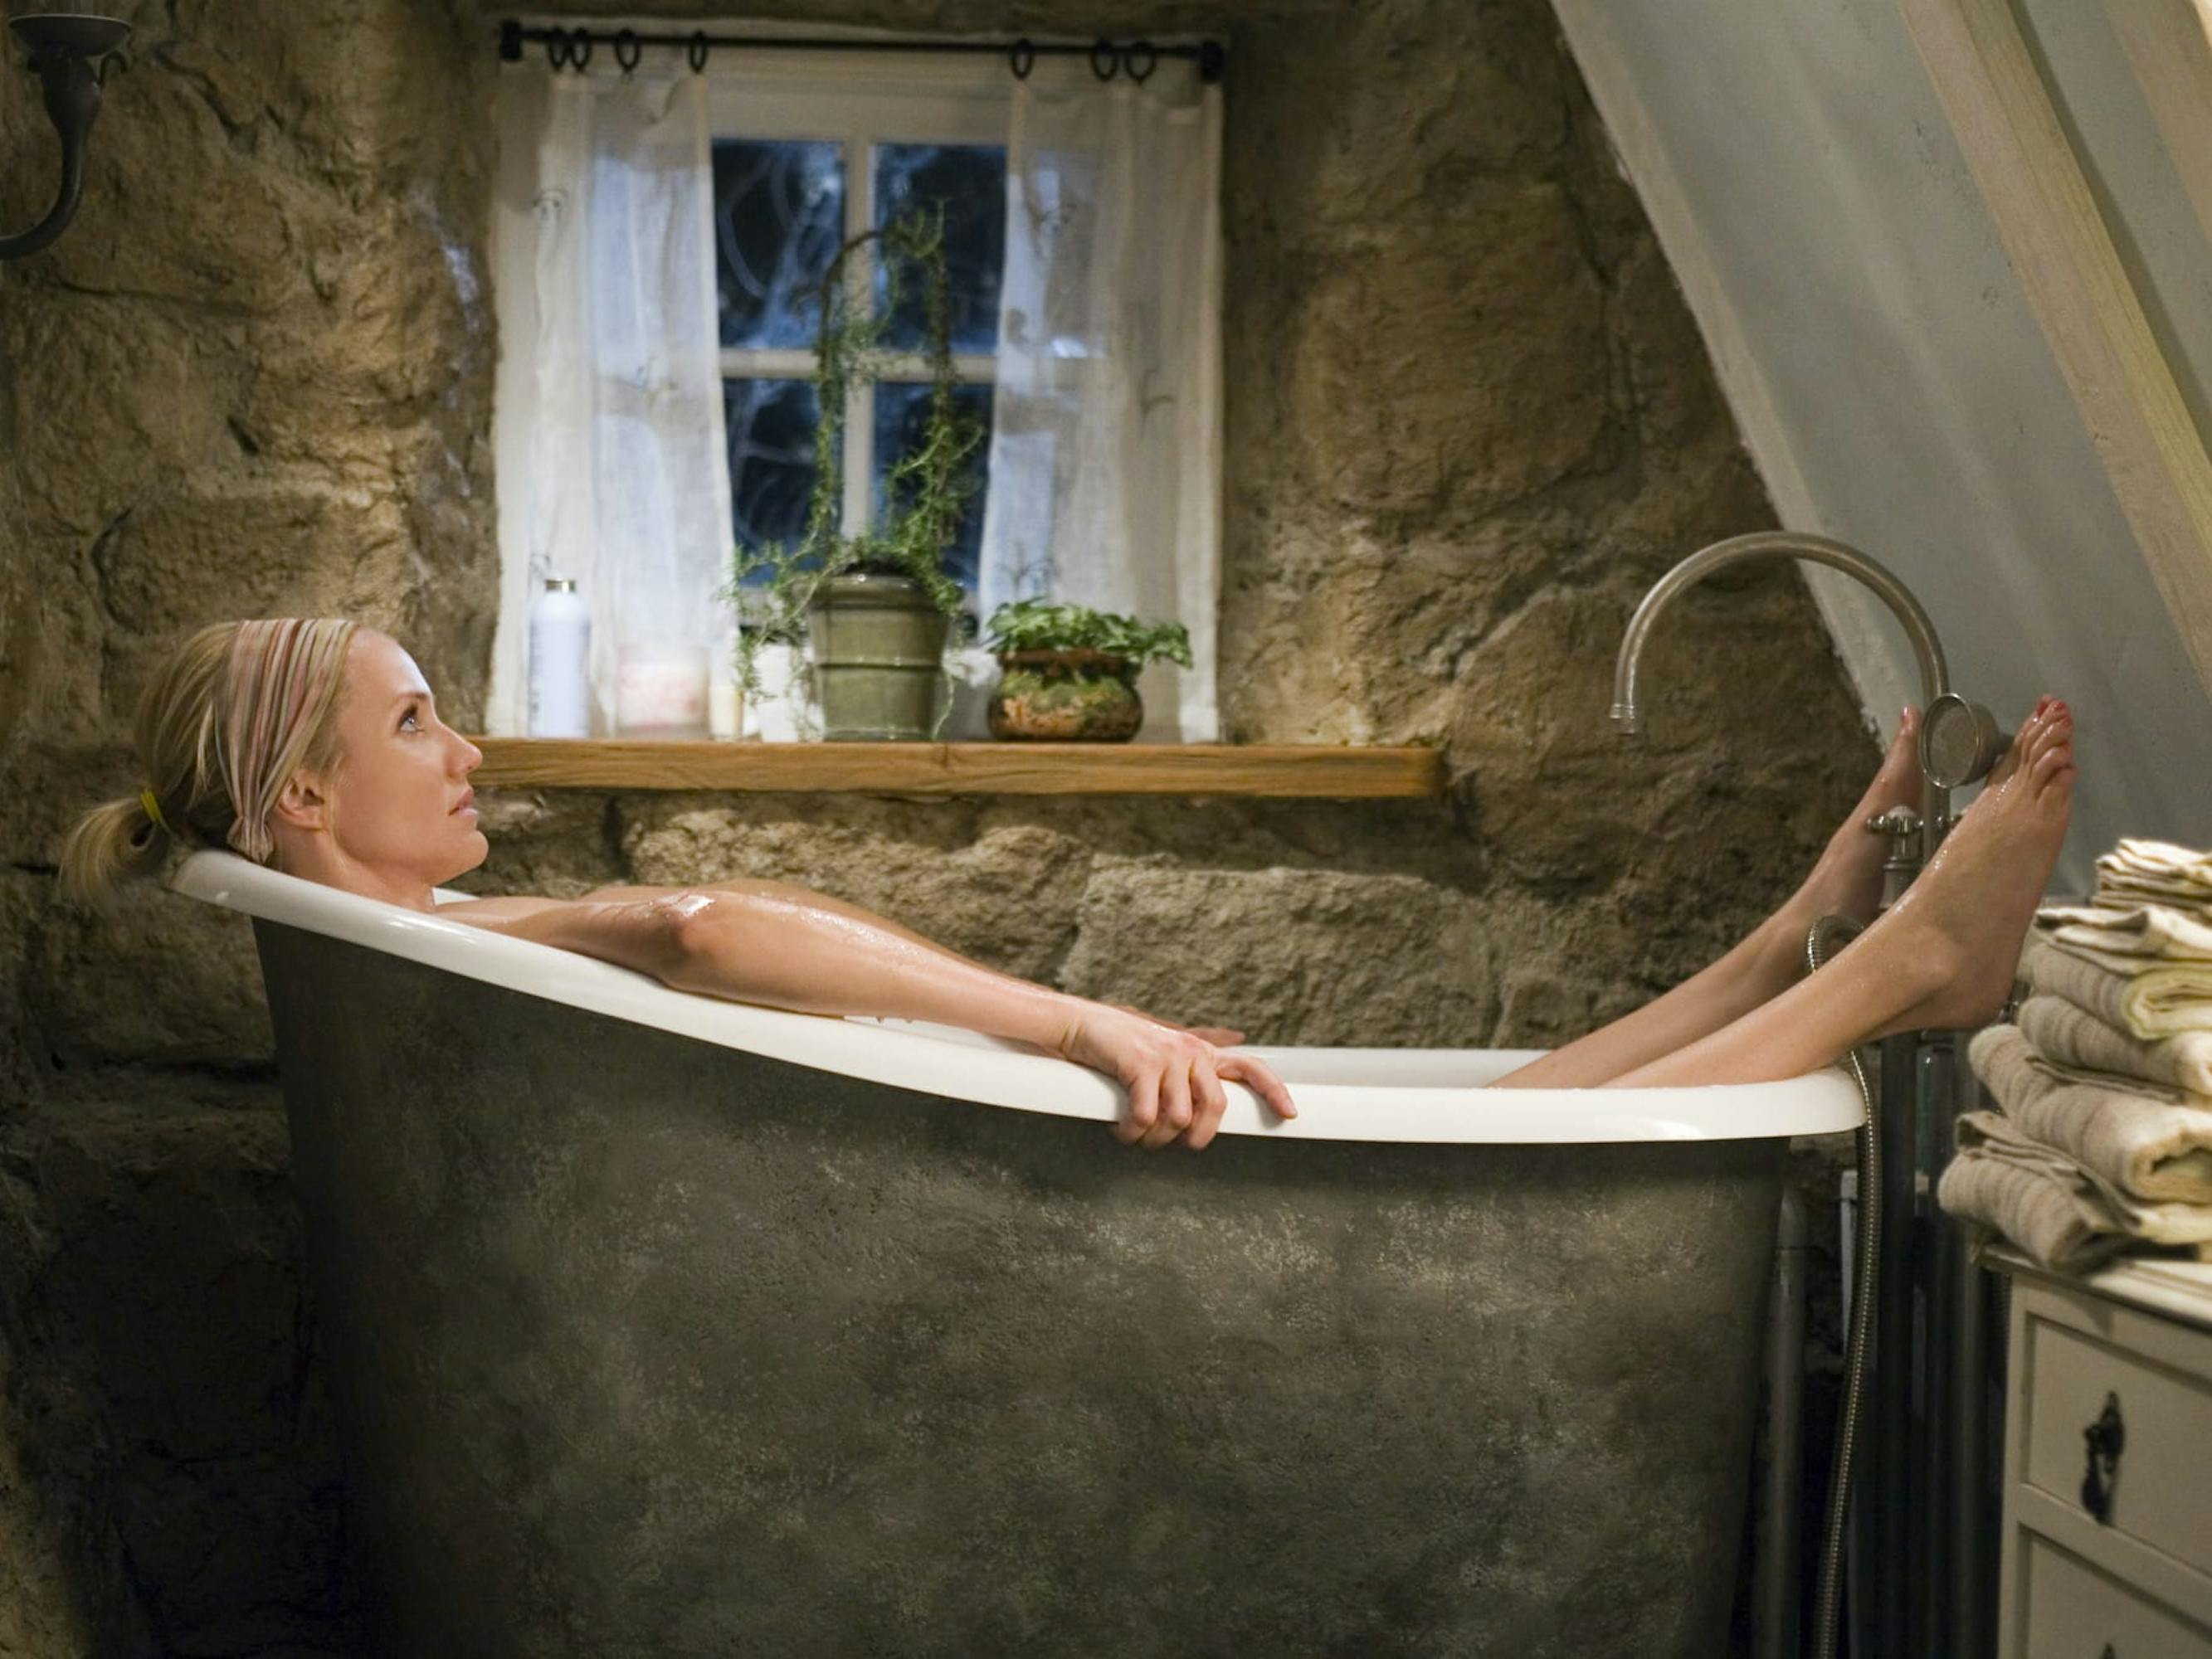 Amanda Woods (Cameron Diaz) in The Holiday lies in a massive tub in a stone-walled bathroom.